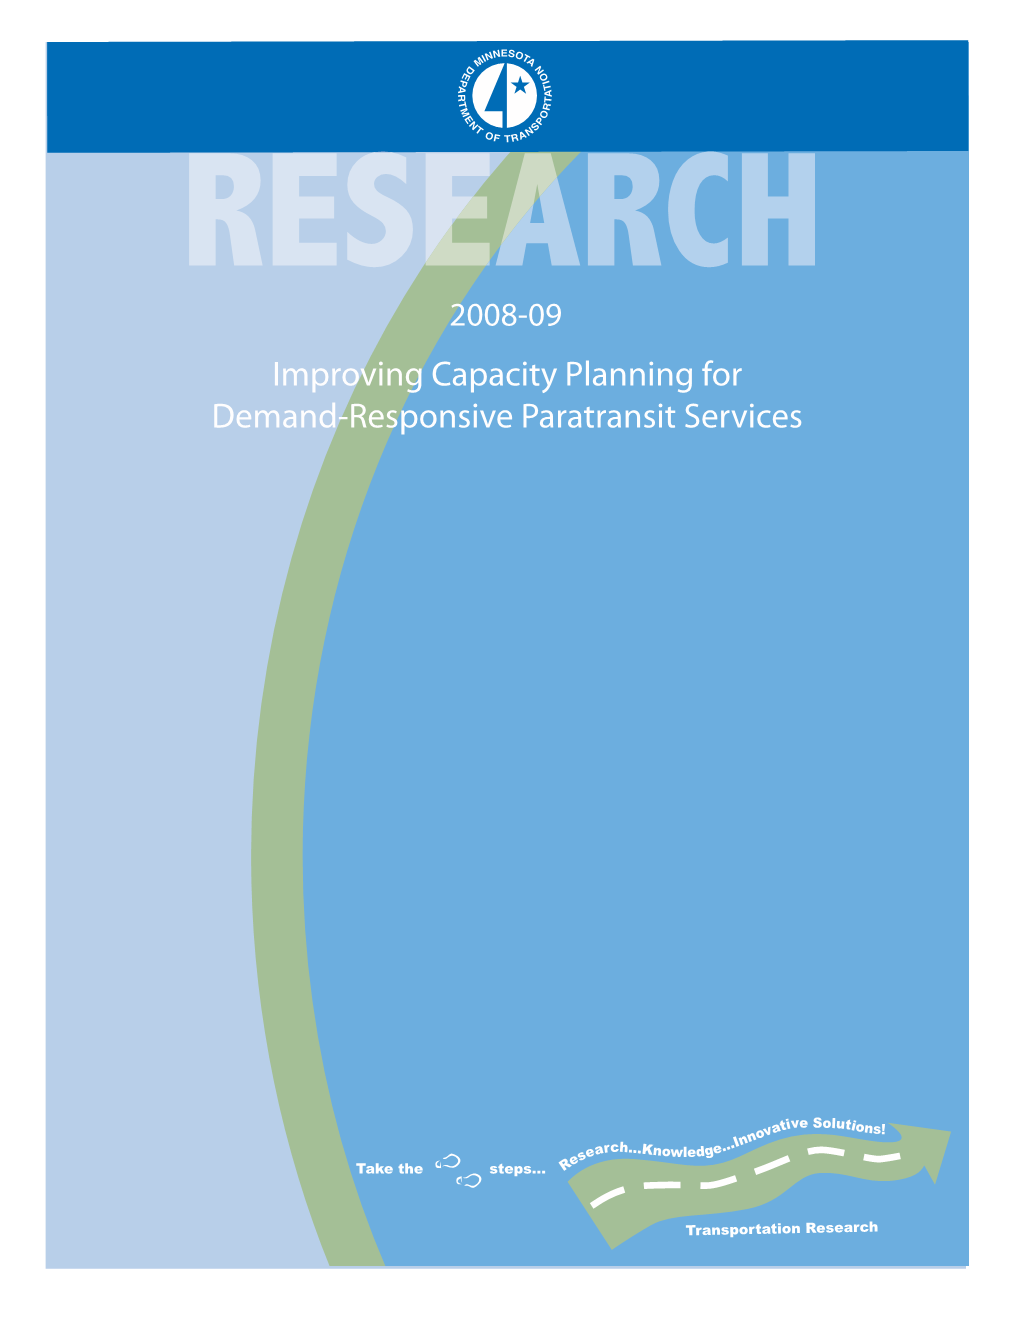 Improving Capacity Planning for Demand-Responsive Paratransit Services